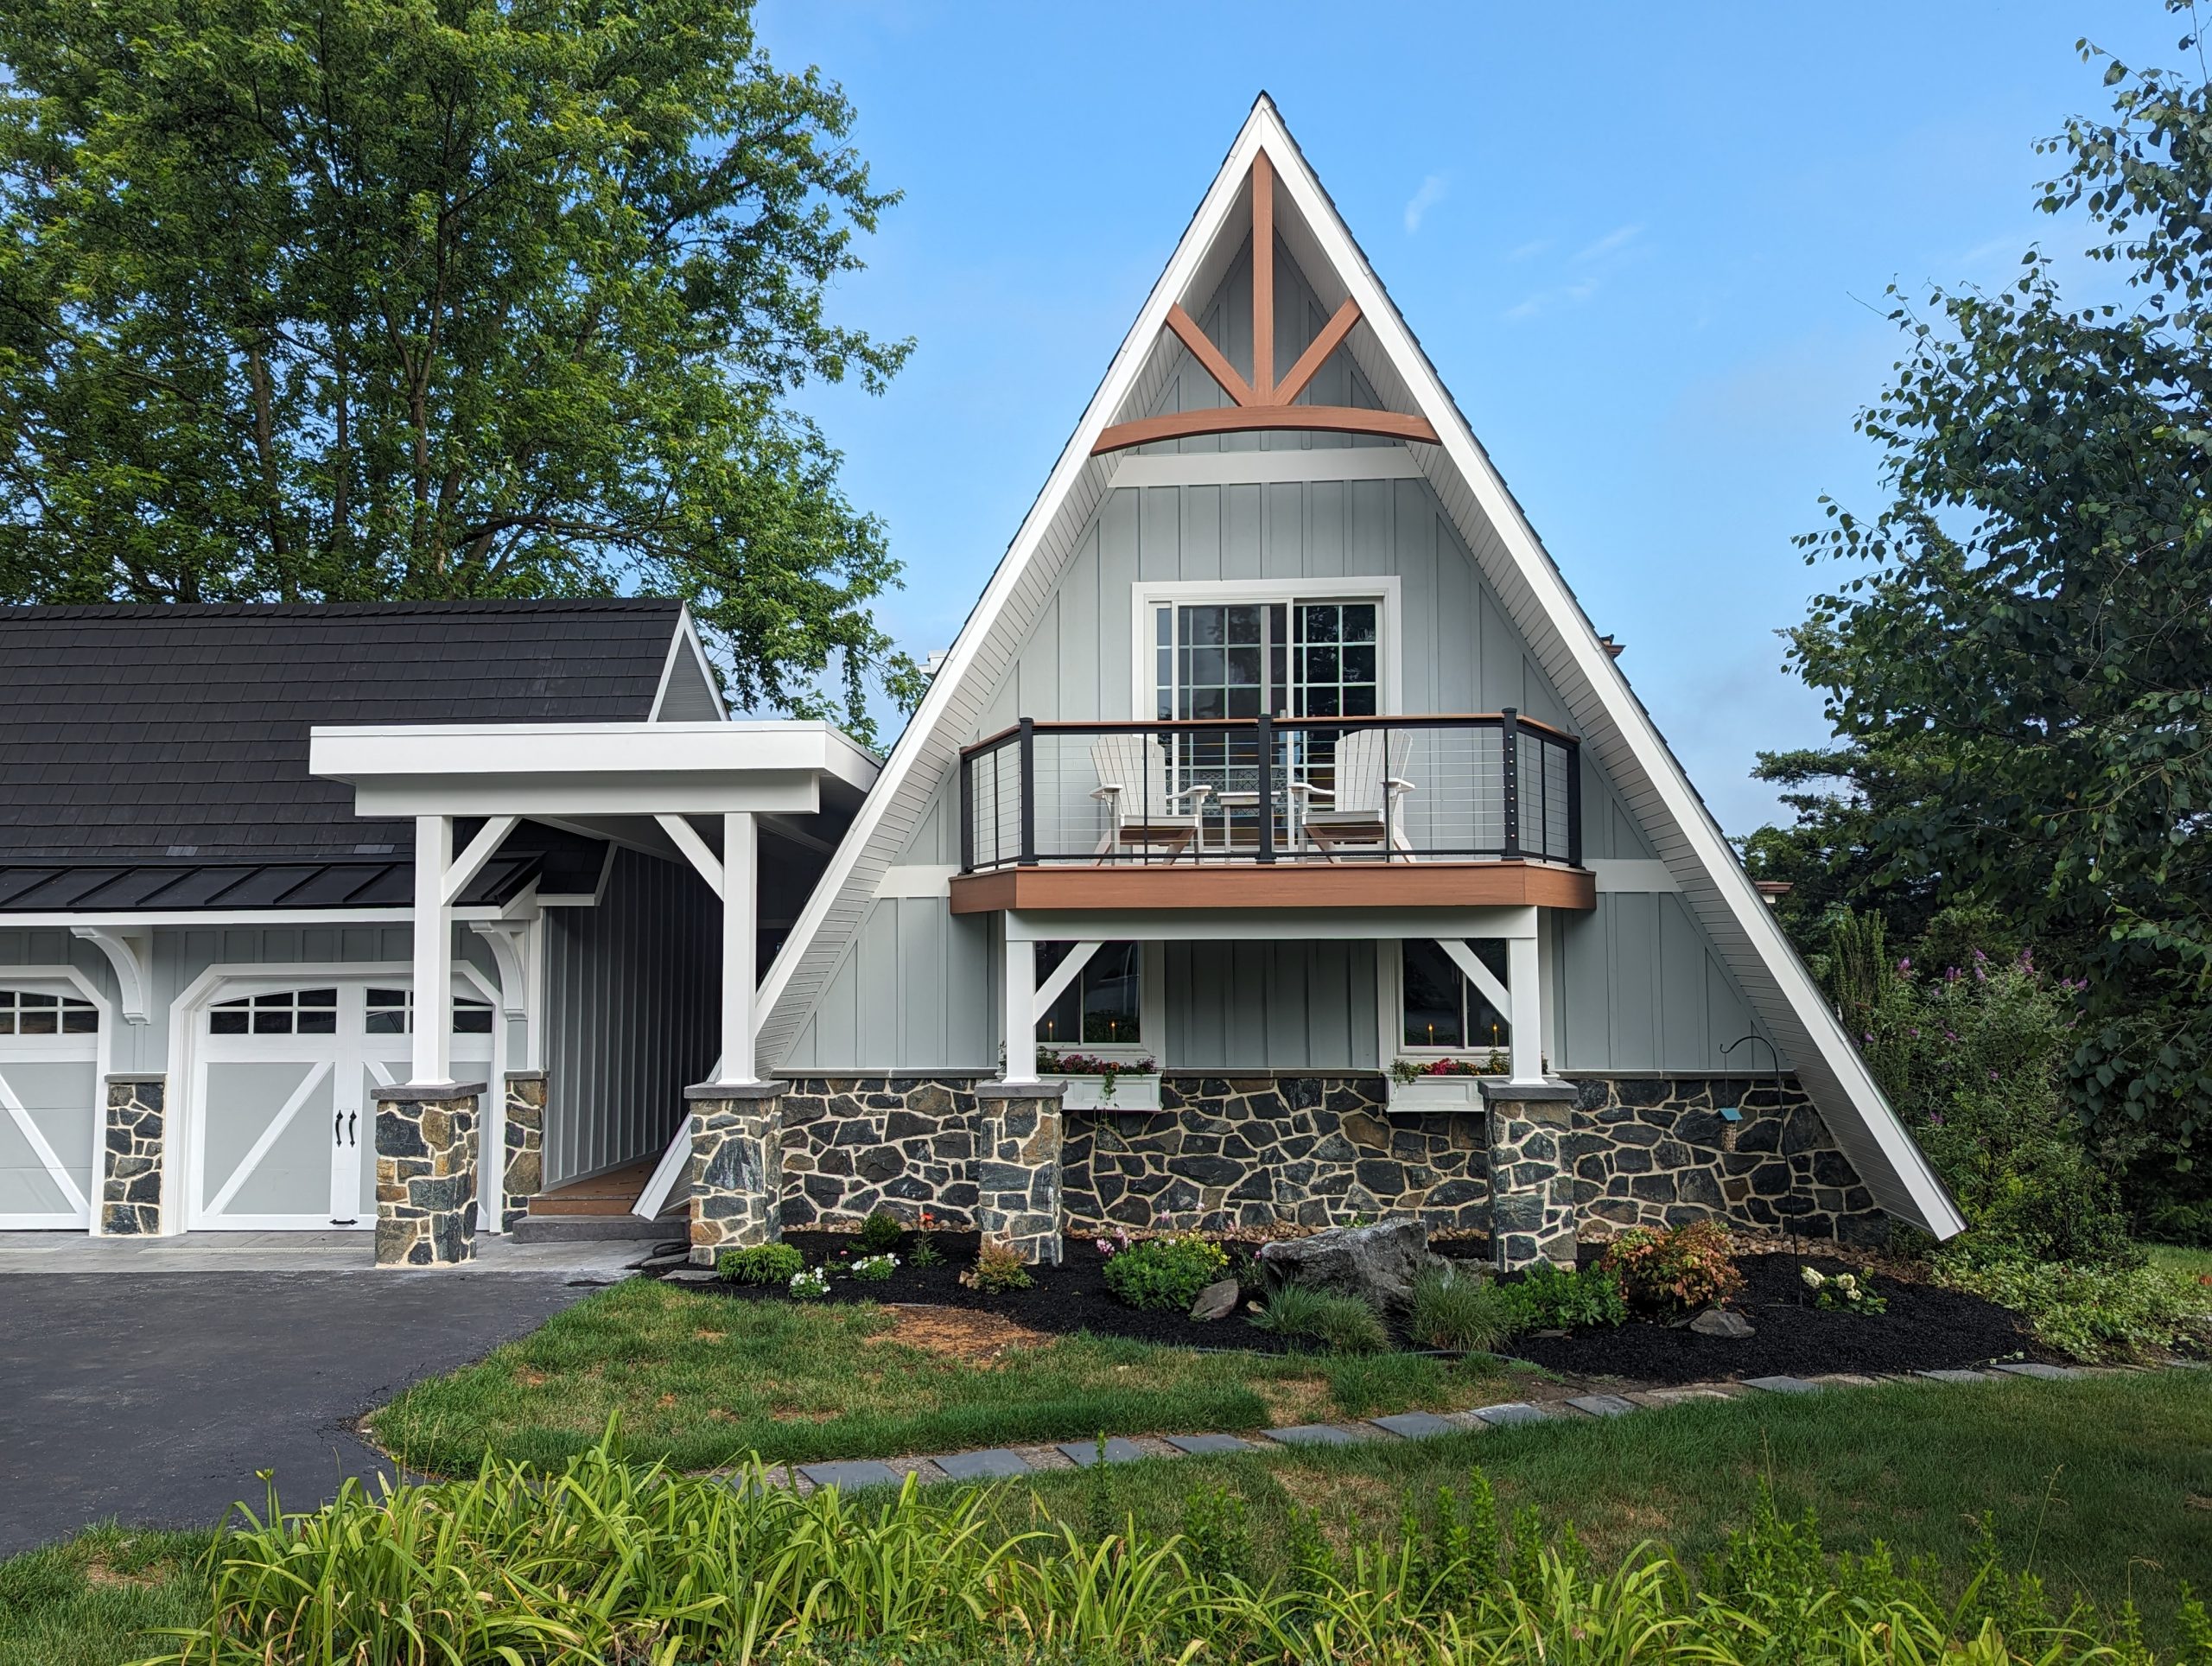 Front exterior of a unique triangle shaped home with new light gray siding, white trim, stone accents, brown balcony, and a matching 2-car garage